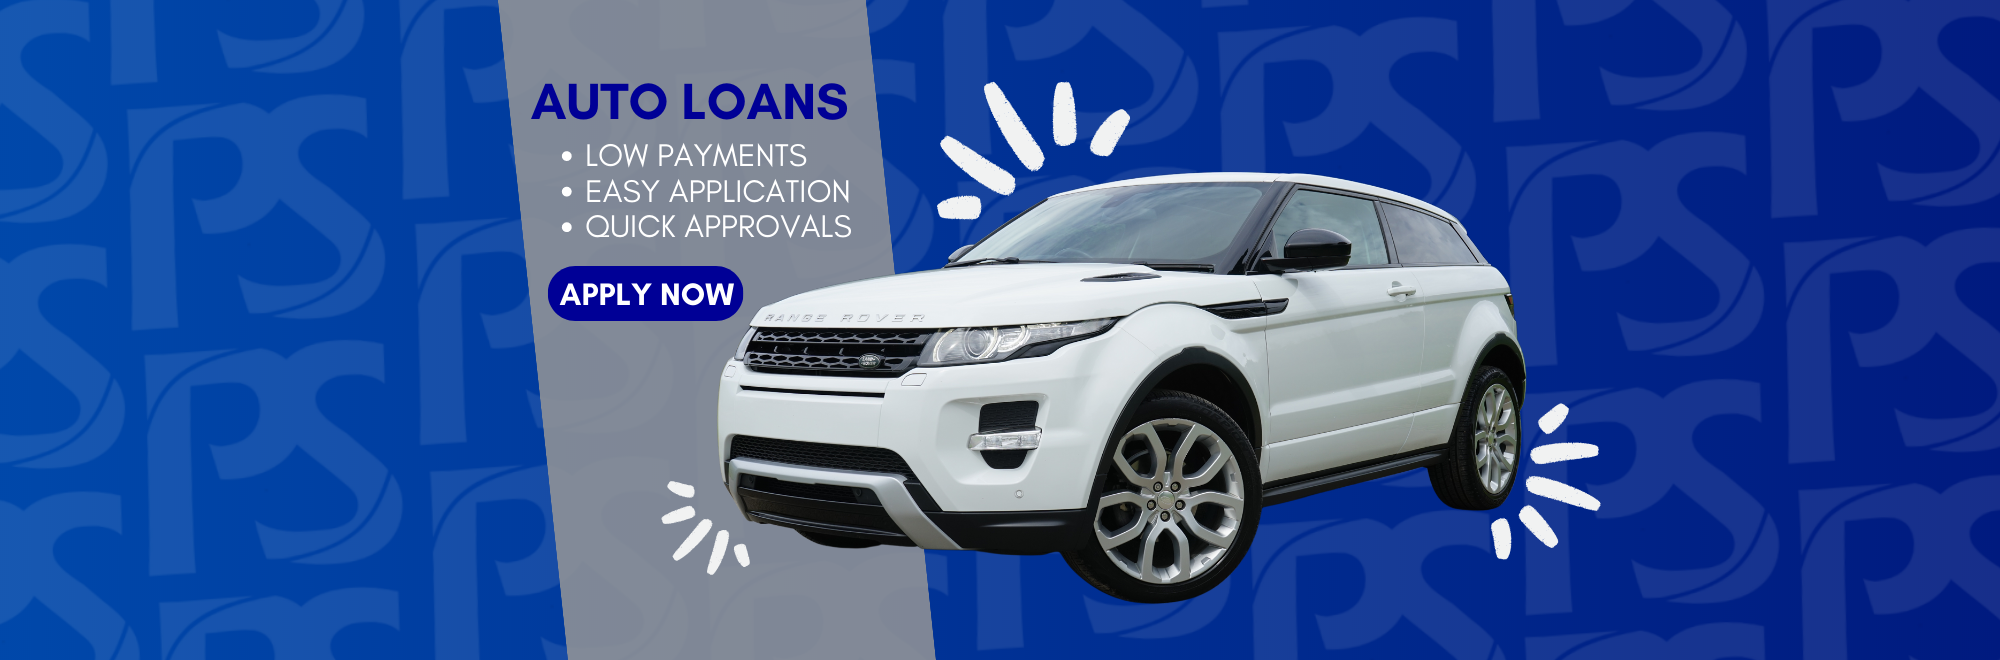 Auto Loans Low Payments, Easy Application, Quick Approvals. Click to apply now